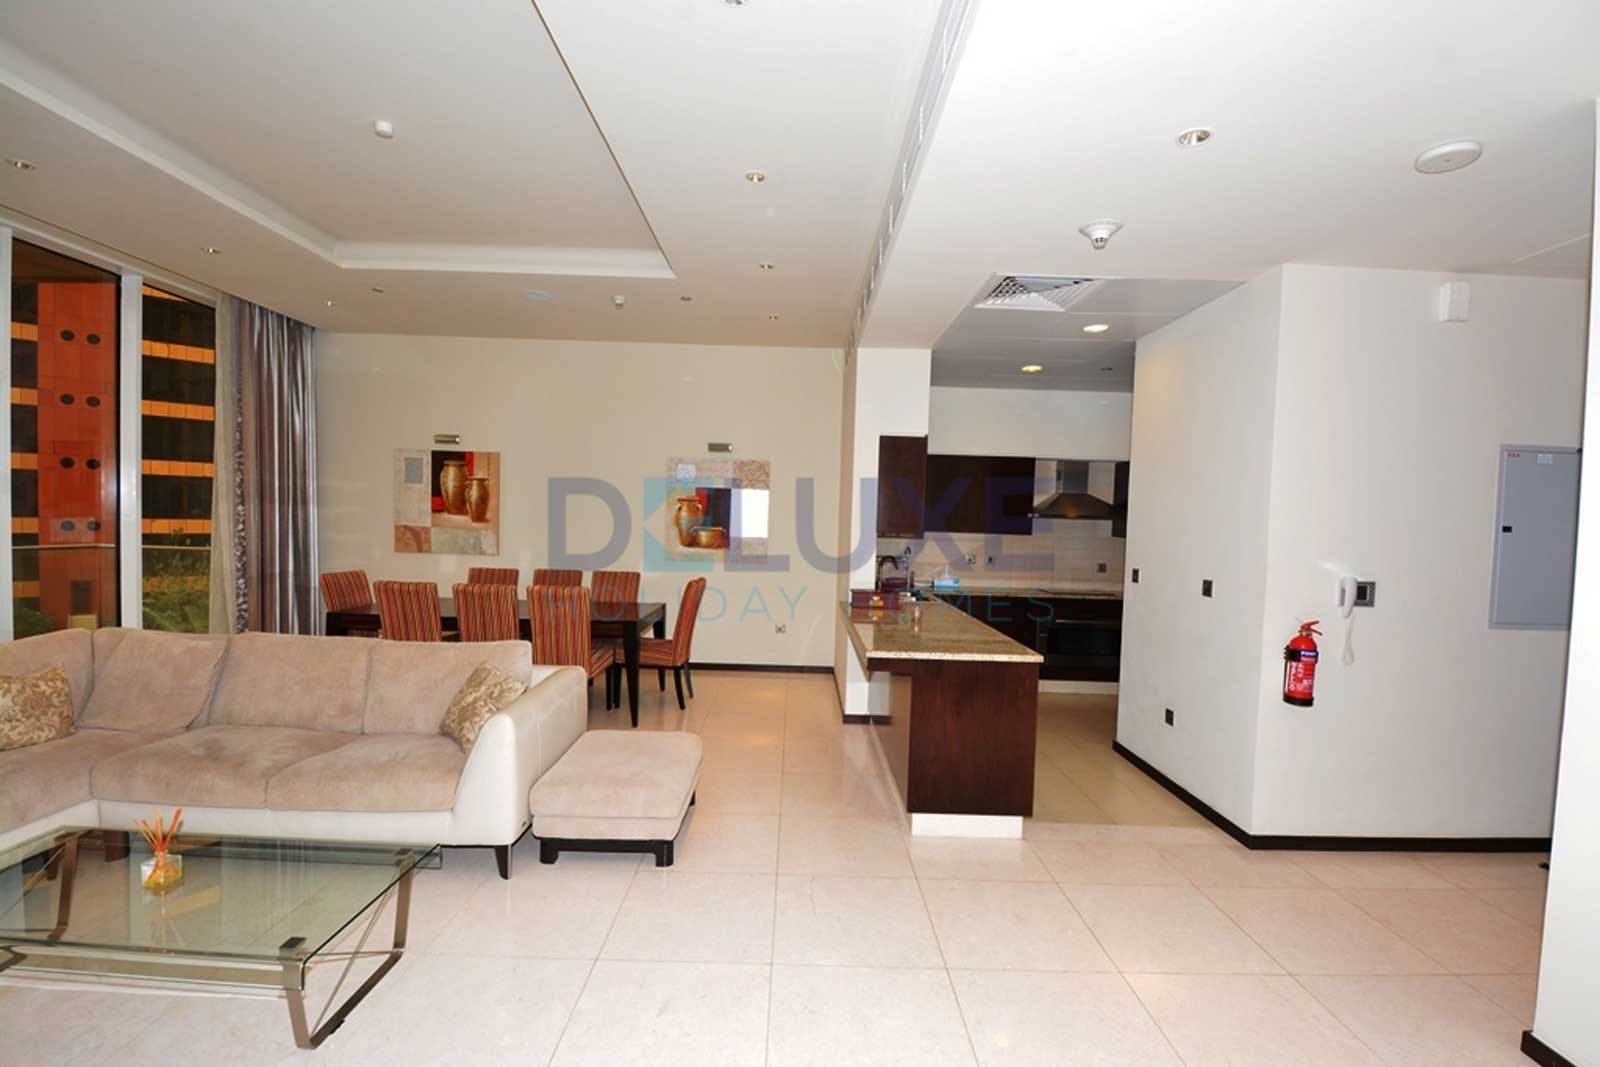 One Bedroom Apartment in Tiara Residences Palm Jumeirah|Deluxe Homes